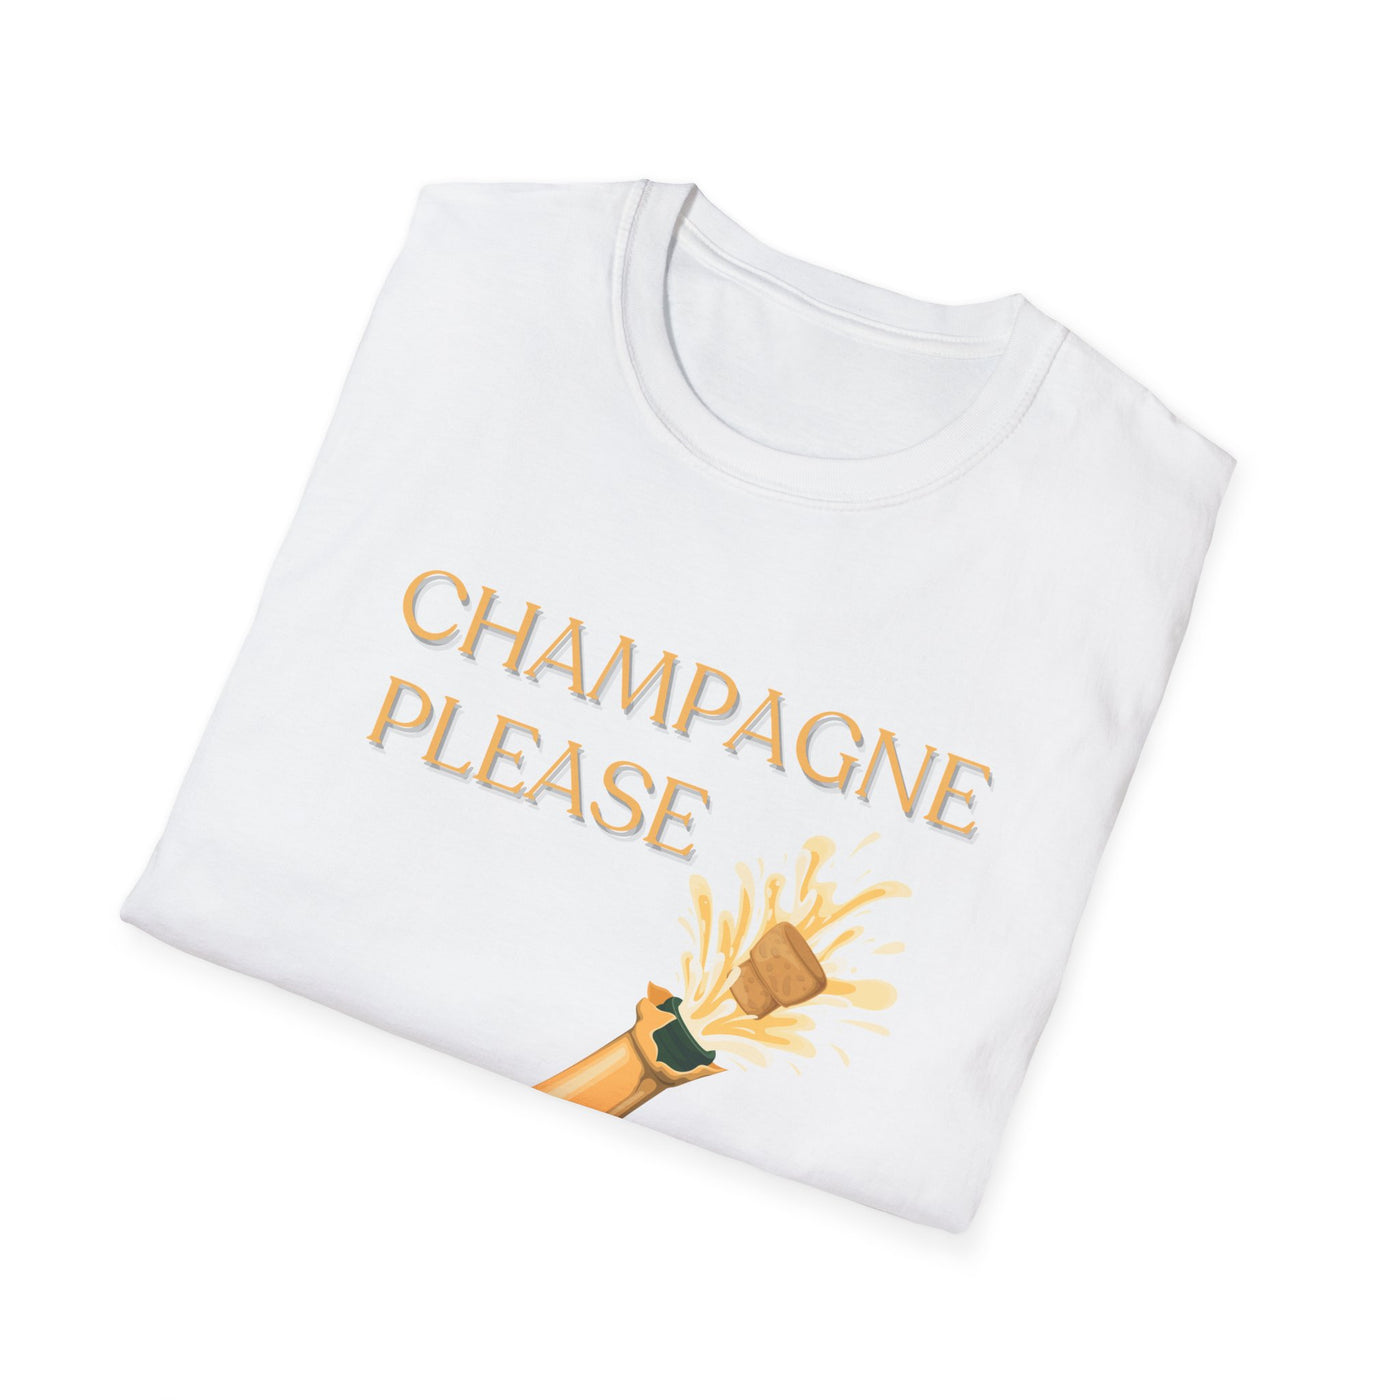 "Champagne Please" Softstyle T-Shirt